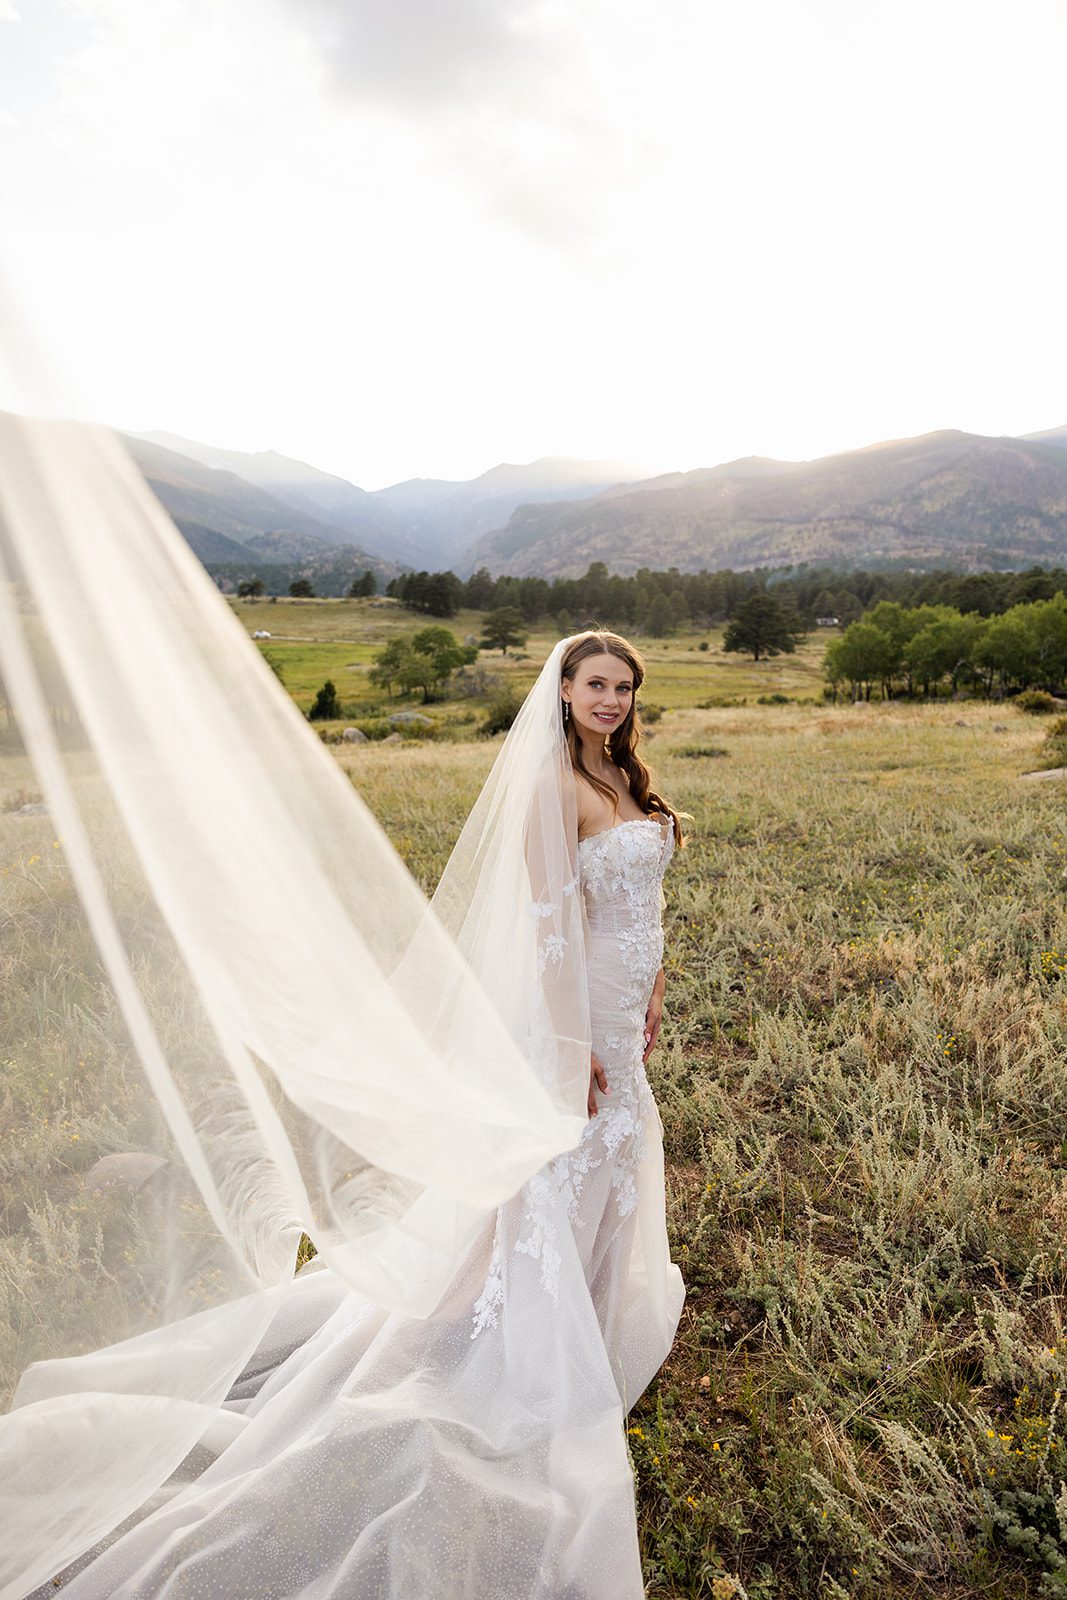 The beautiful bride with her veil blowing in the wind. 